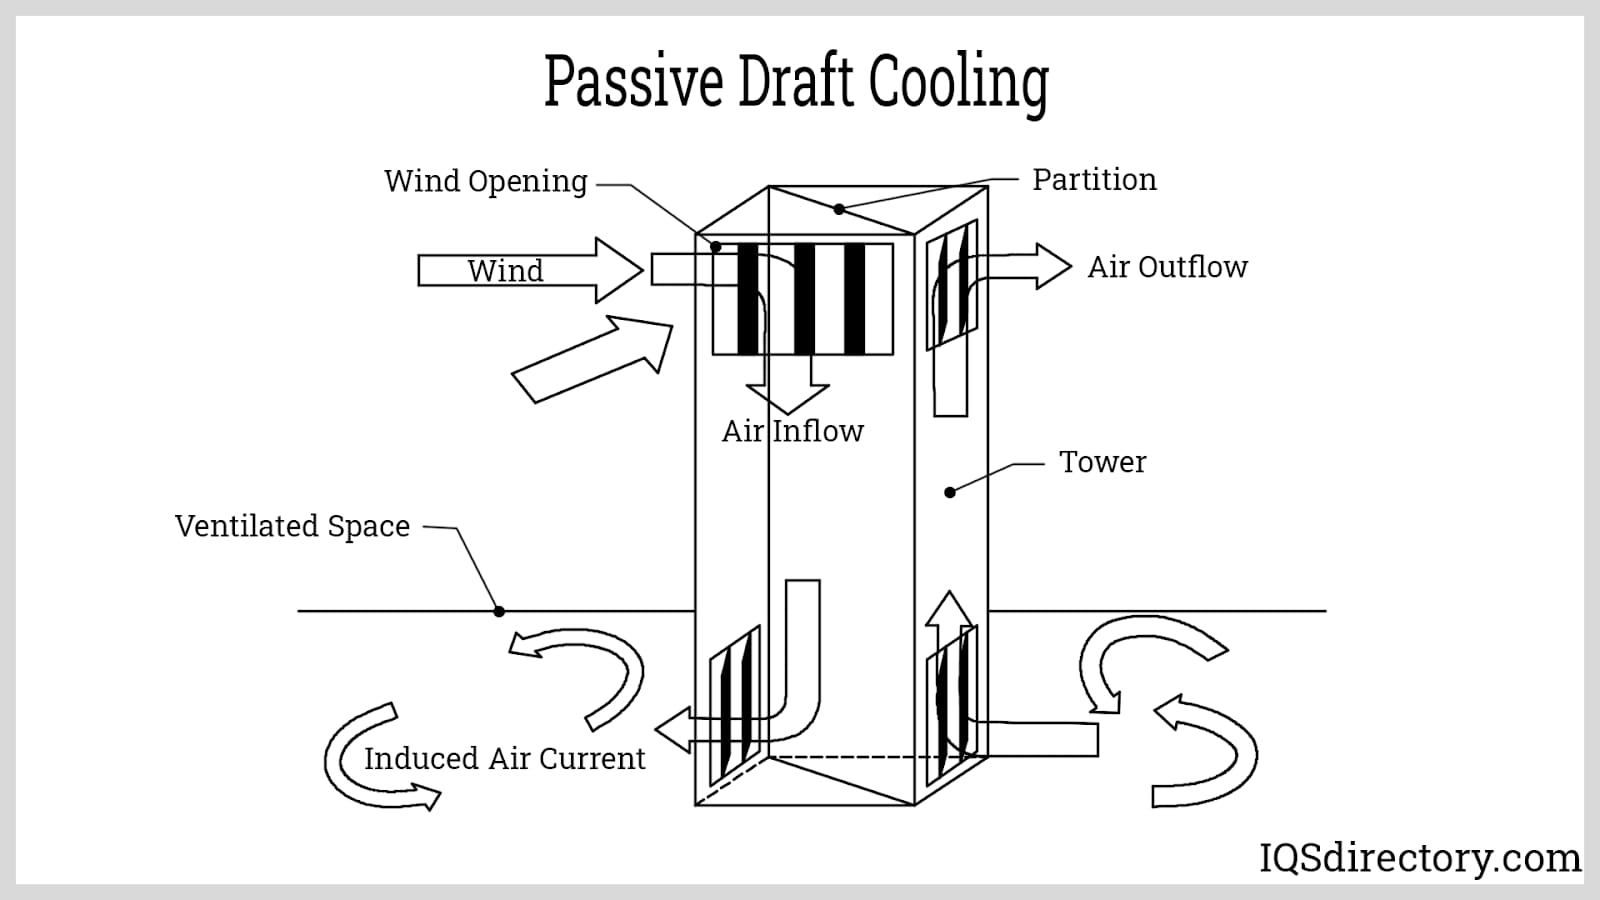 Passive Draft Cooling